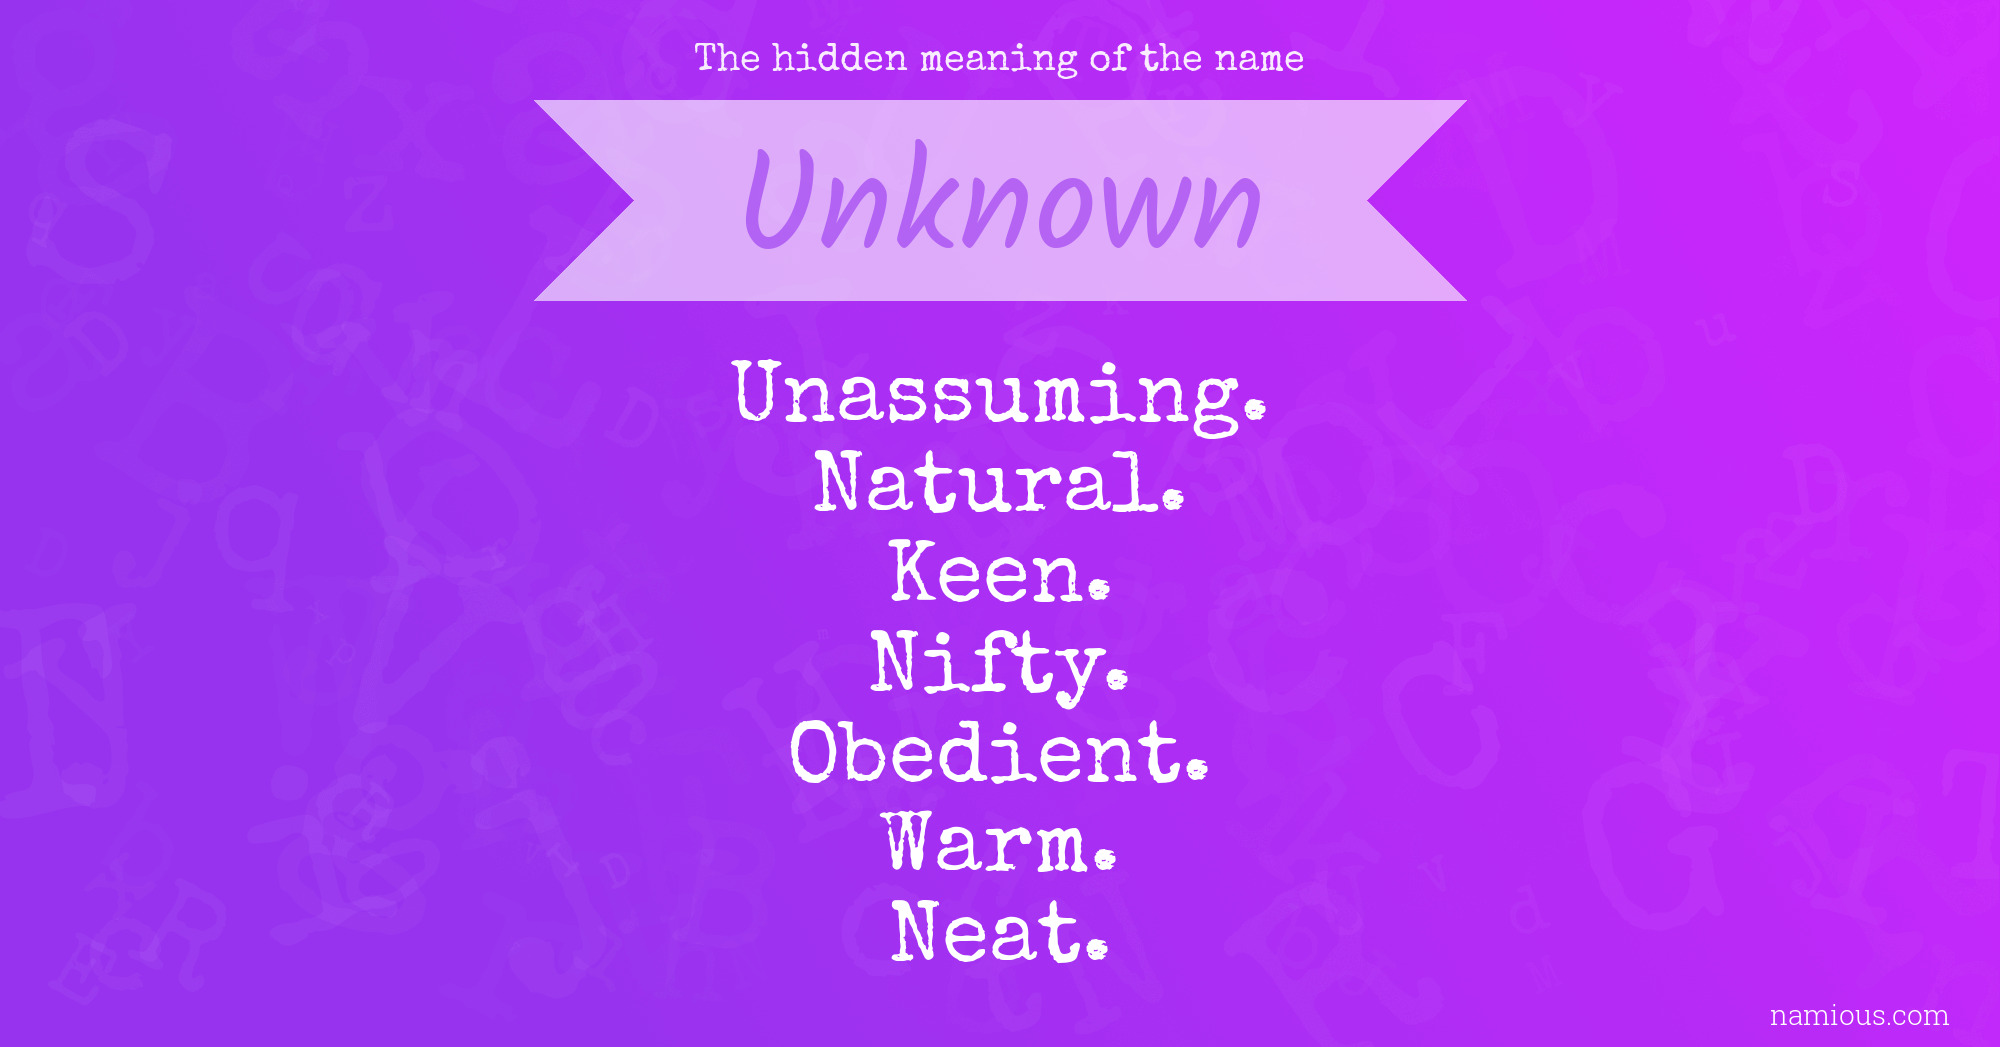 The hidden meaning of the name Unknown